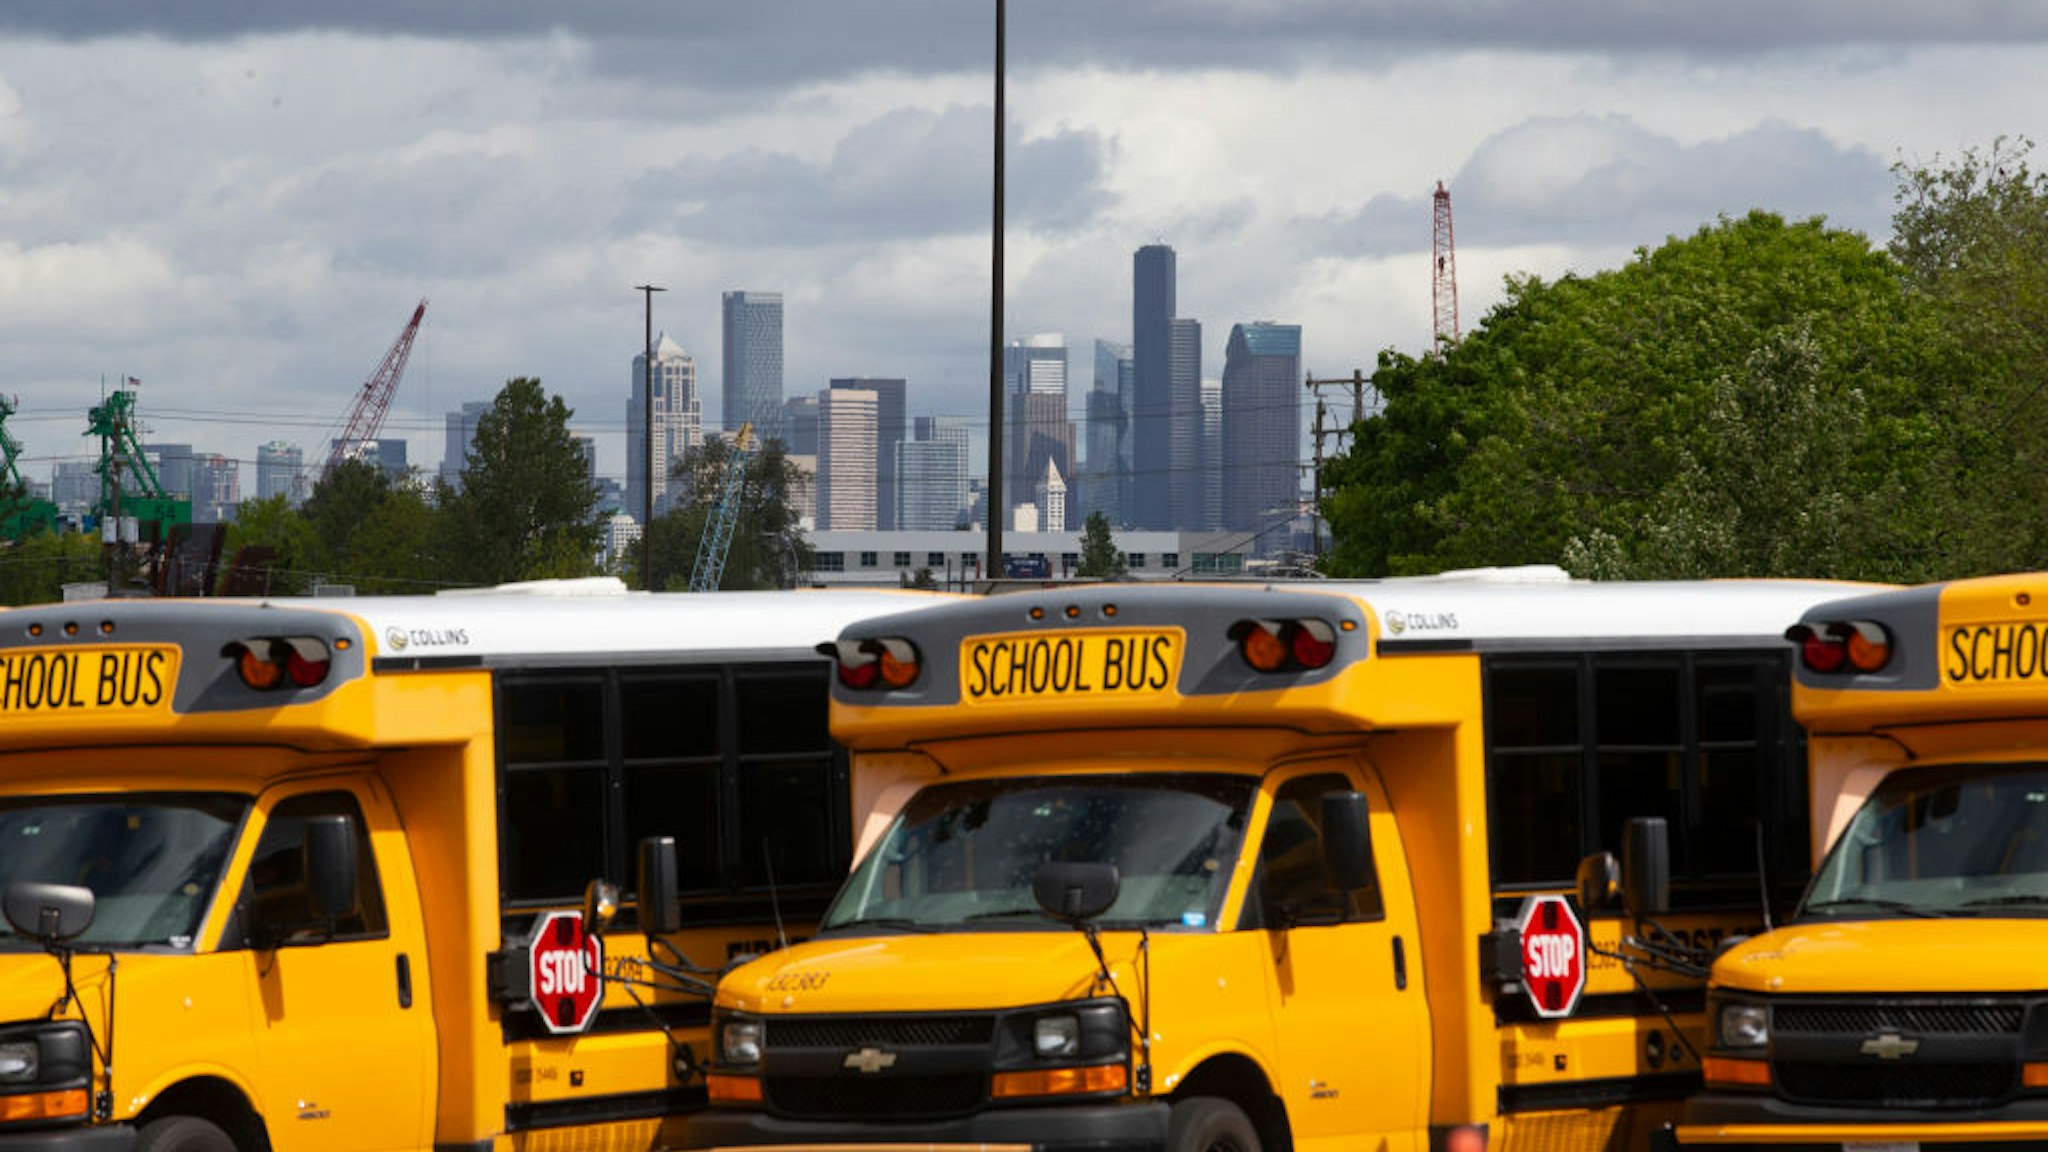 SEATTLE, WA - MAY 06: School buses sit idle in a bus yard on May 6, 2020 in Seattle, Washington. Since the outbreak of COVID-19 and the closure of all school buildings, the Seattle Public Schools Nutrition Services Department has been distributing breakfast and lunch to students through a network of 26 school sites and 43 bus routes five days a week. The meal distribution also includes additional food for weekends. Approximately 6,500 people are served per day through the program. (Photo by Karen Ducey/Getty Images)